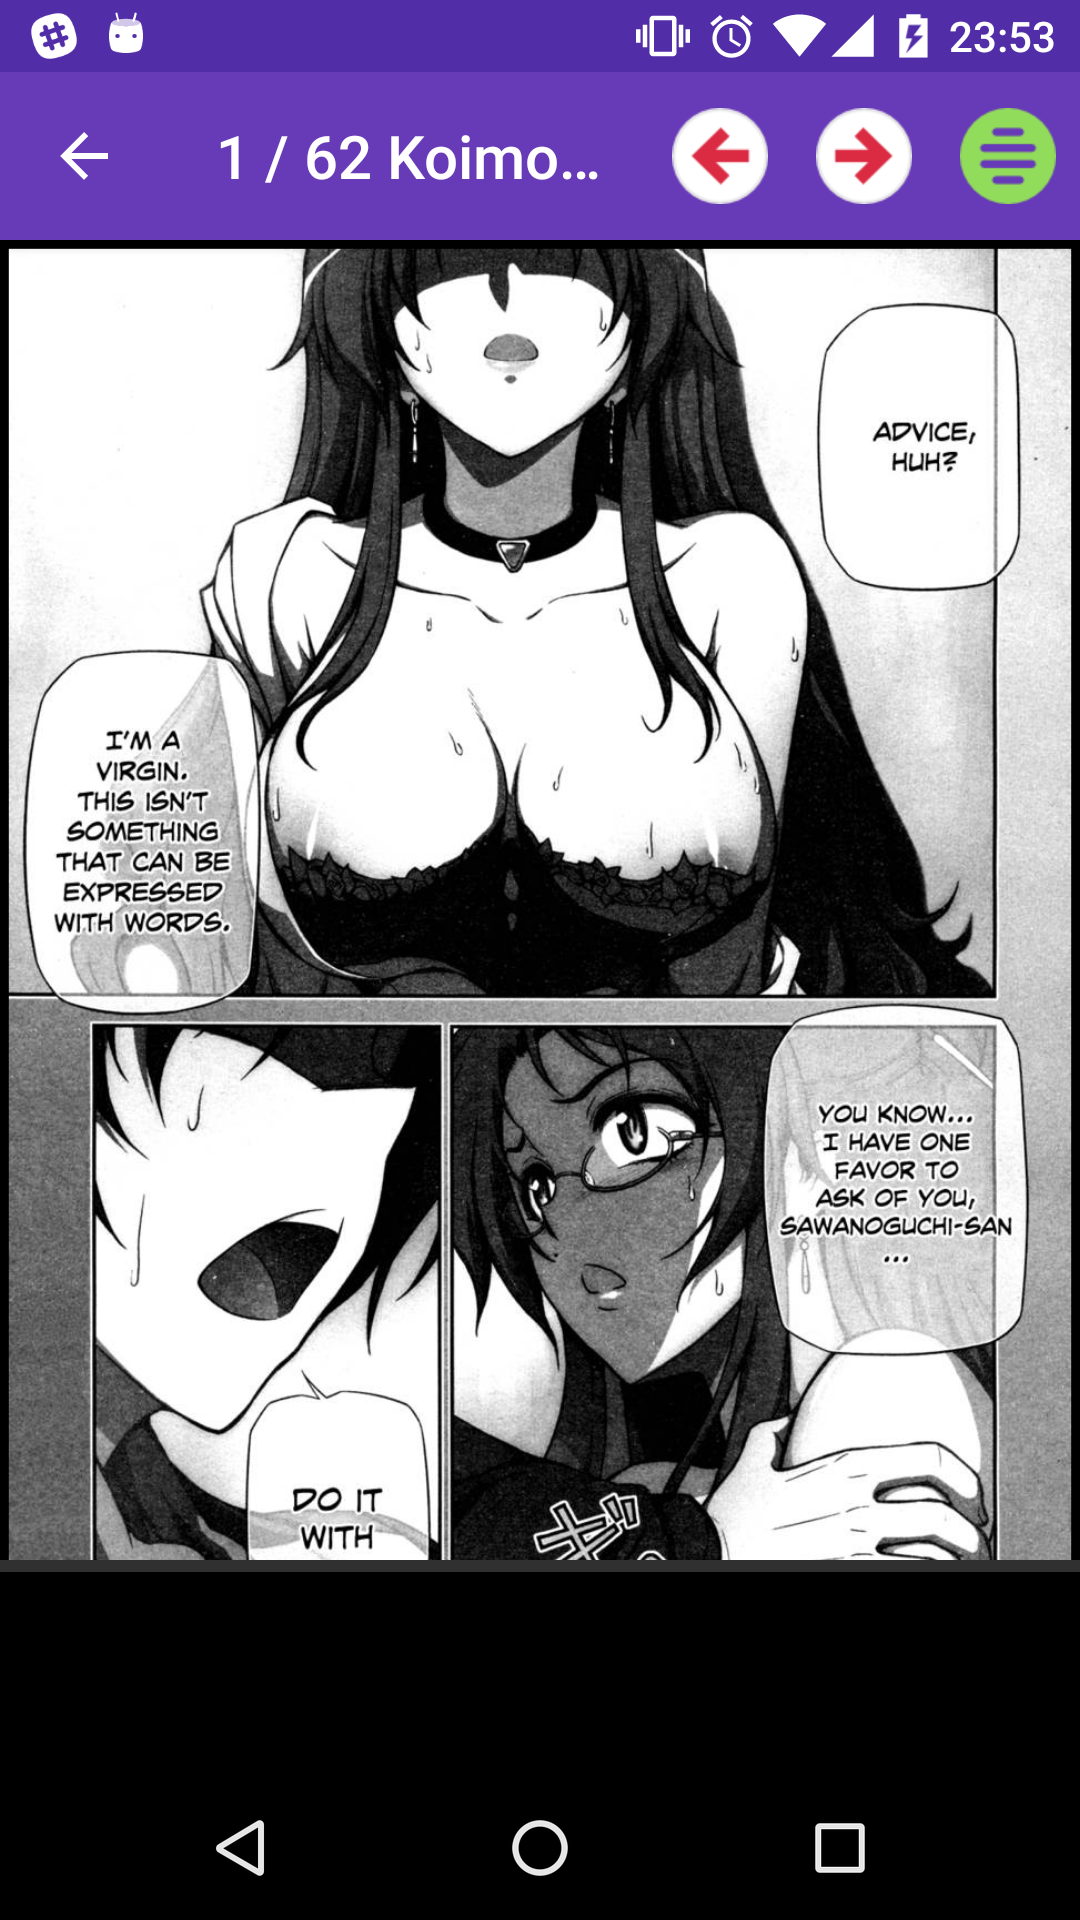 Hentai Manga Anime 2 gallery,anime,apk,lily,english,hentai,pictures,henati,drawings,porn,hot,comicses,manga,applications,hentie,image,pic,femboy,sexy,galleries,pics,lane,translated,pornstar,collection